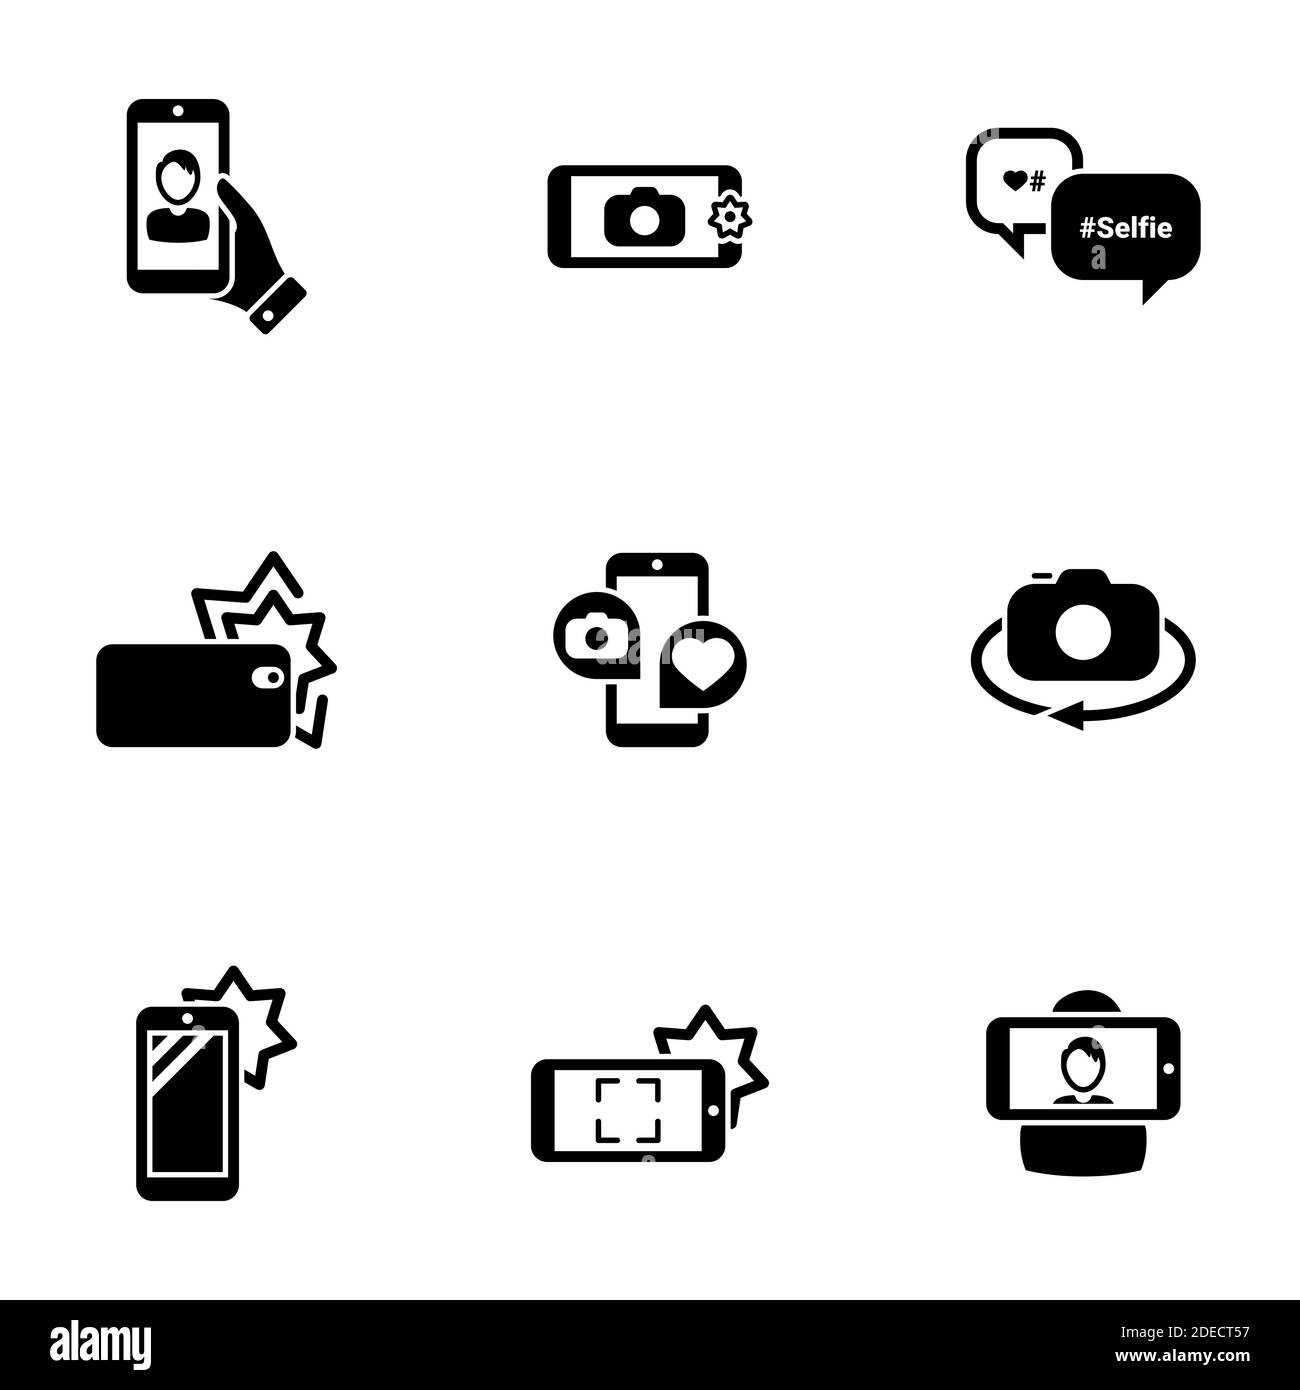 Set of simple icons on a theme Self, photo, camera, phone, mobile, interaction, technology, vector, set. Black icons isolated against white background Stock Vector